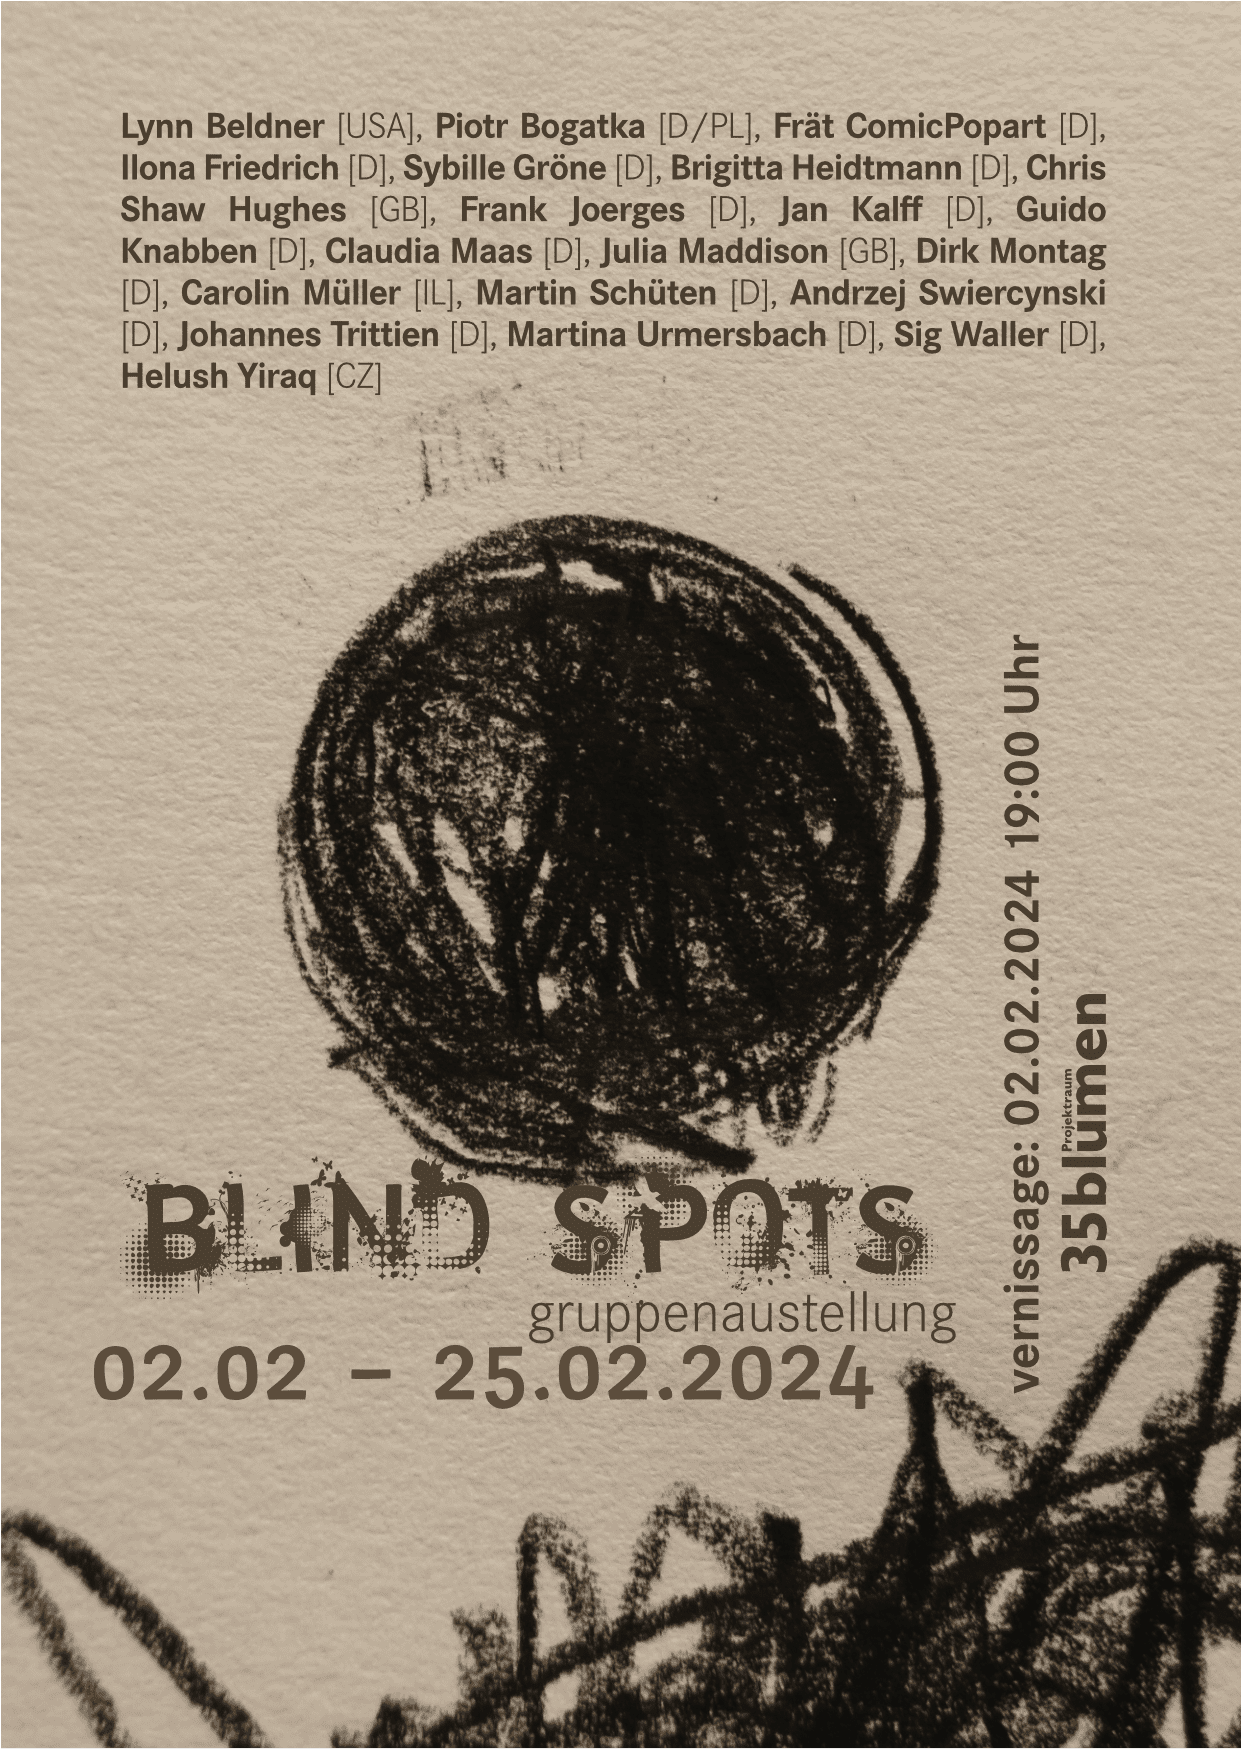 You are currently viewing Ausstellung “Blind Spots” – Presse – RP 03.02.2024